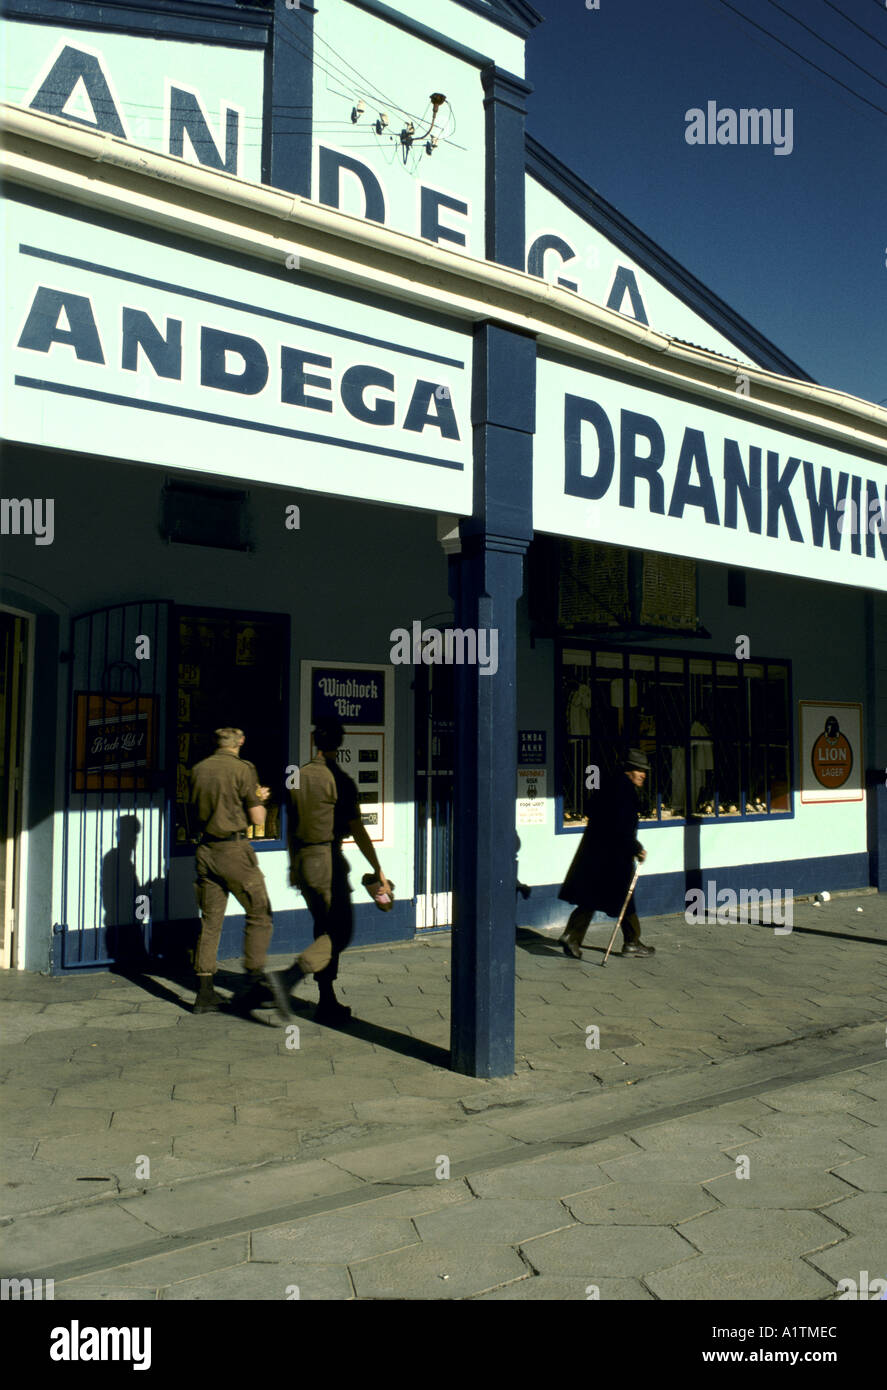 LOCAL STORE NAMIBIA with men walking in shadows and writing in Afrikaans Stock Photo